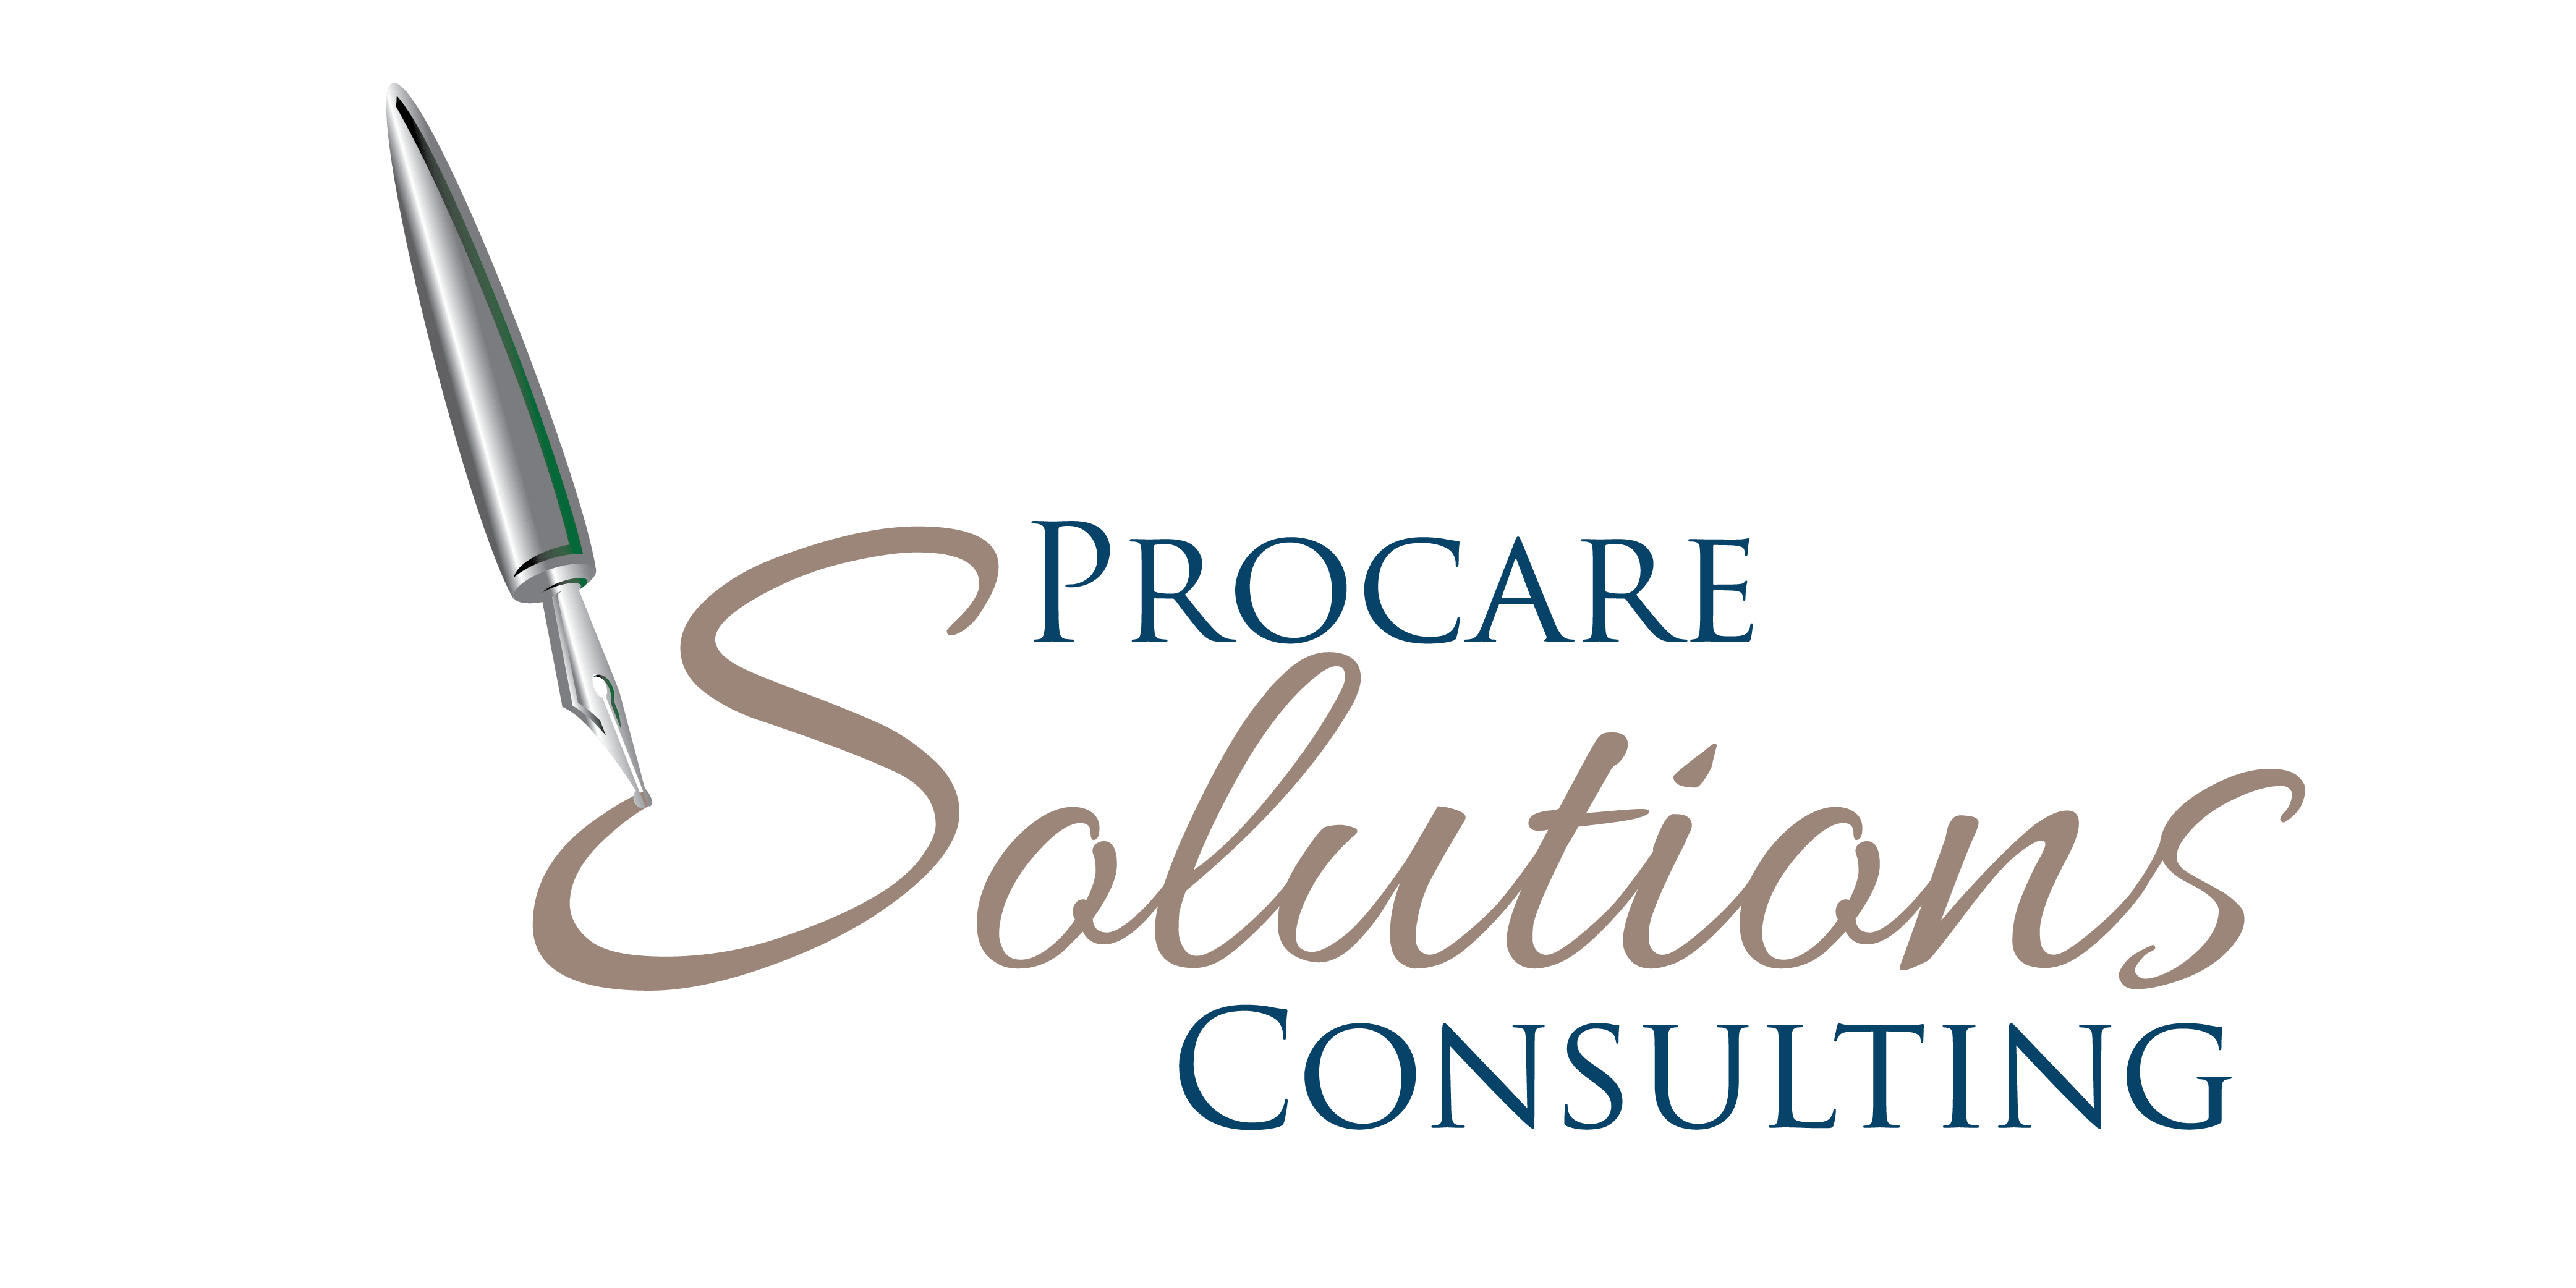 Procare Solutions Consulting School of Life & Business